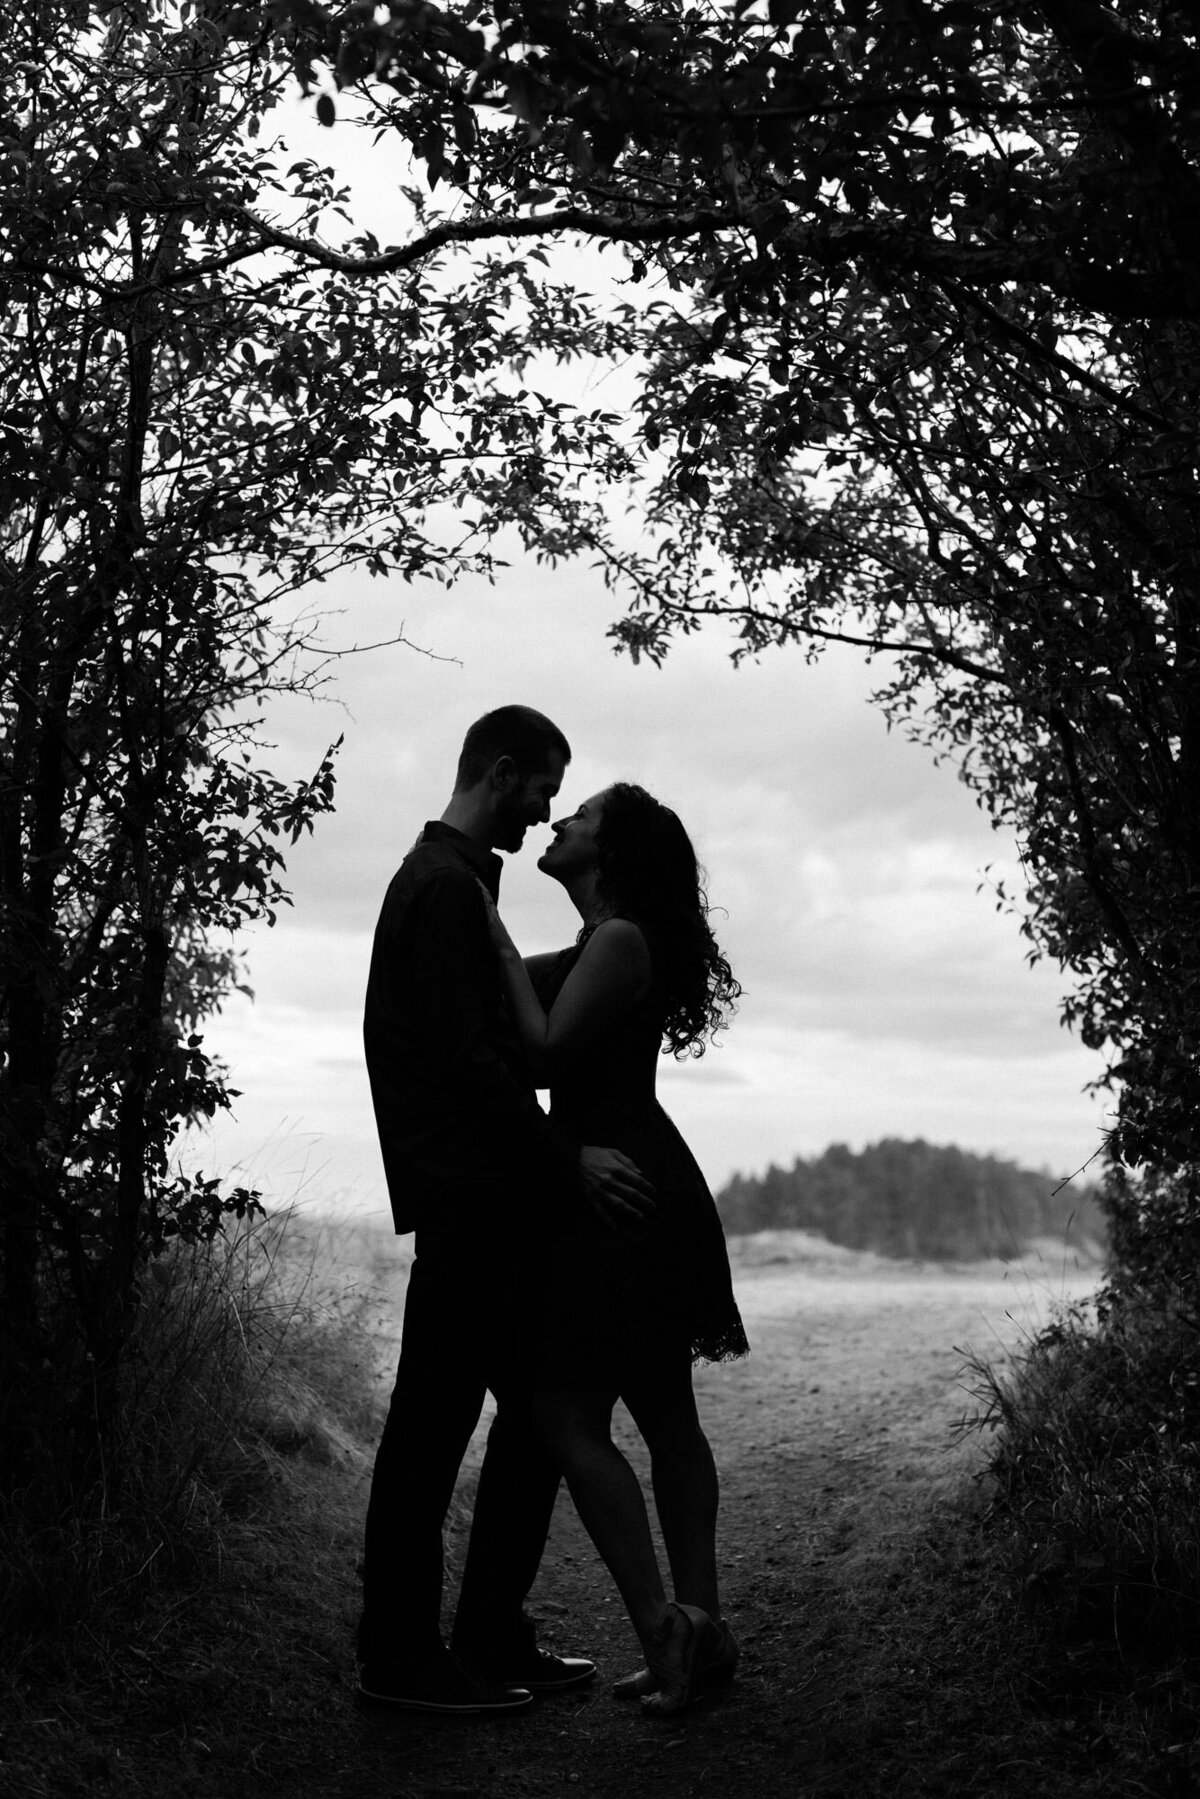 Black and white silhouette engagement photos at Deception Pass near Seattle romantic dramatic photo by Joanna Monger Photography